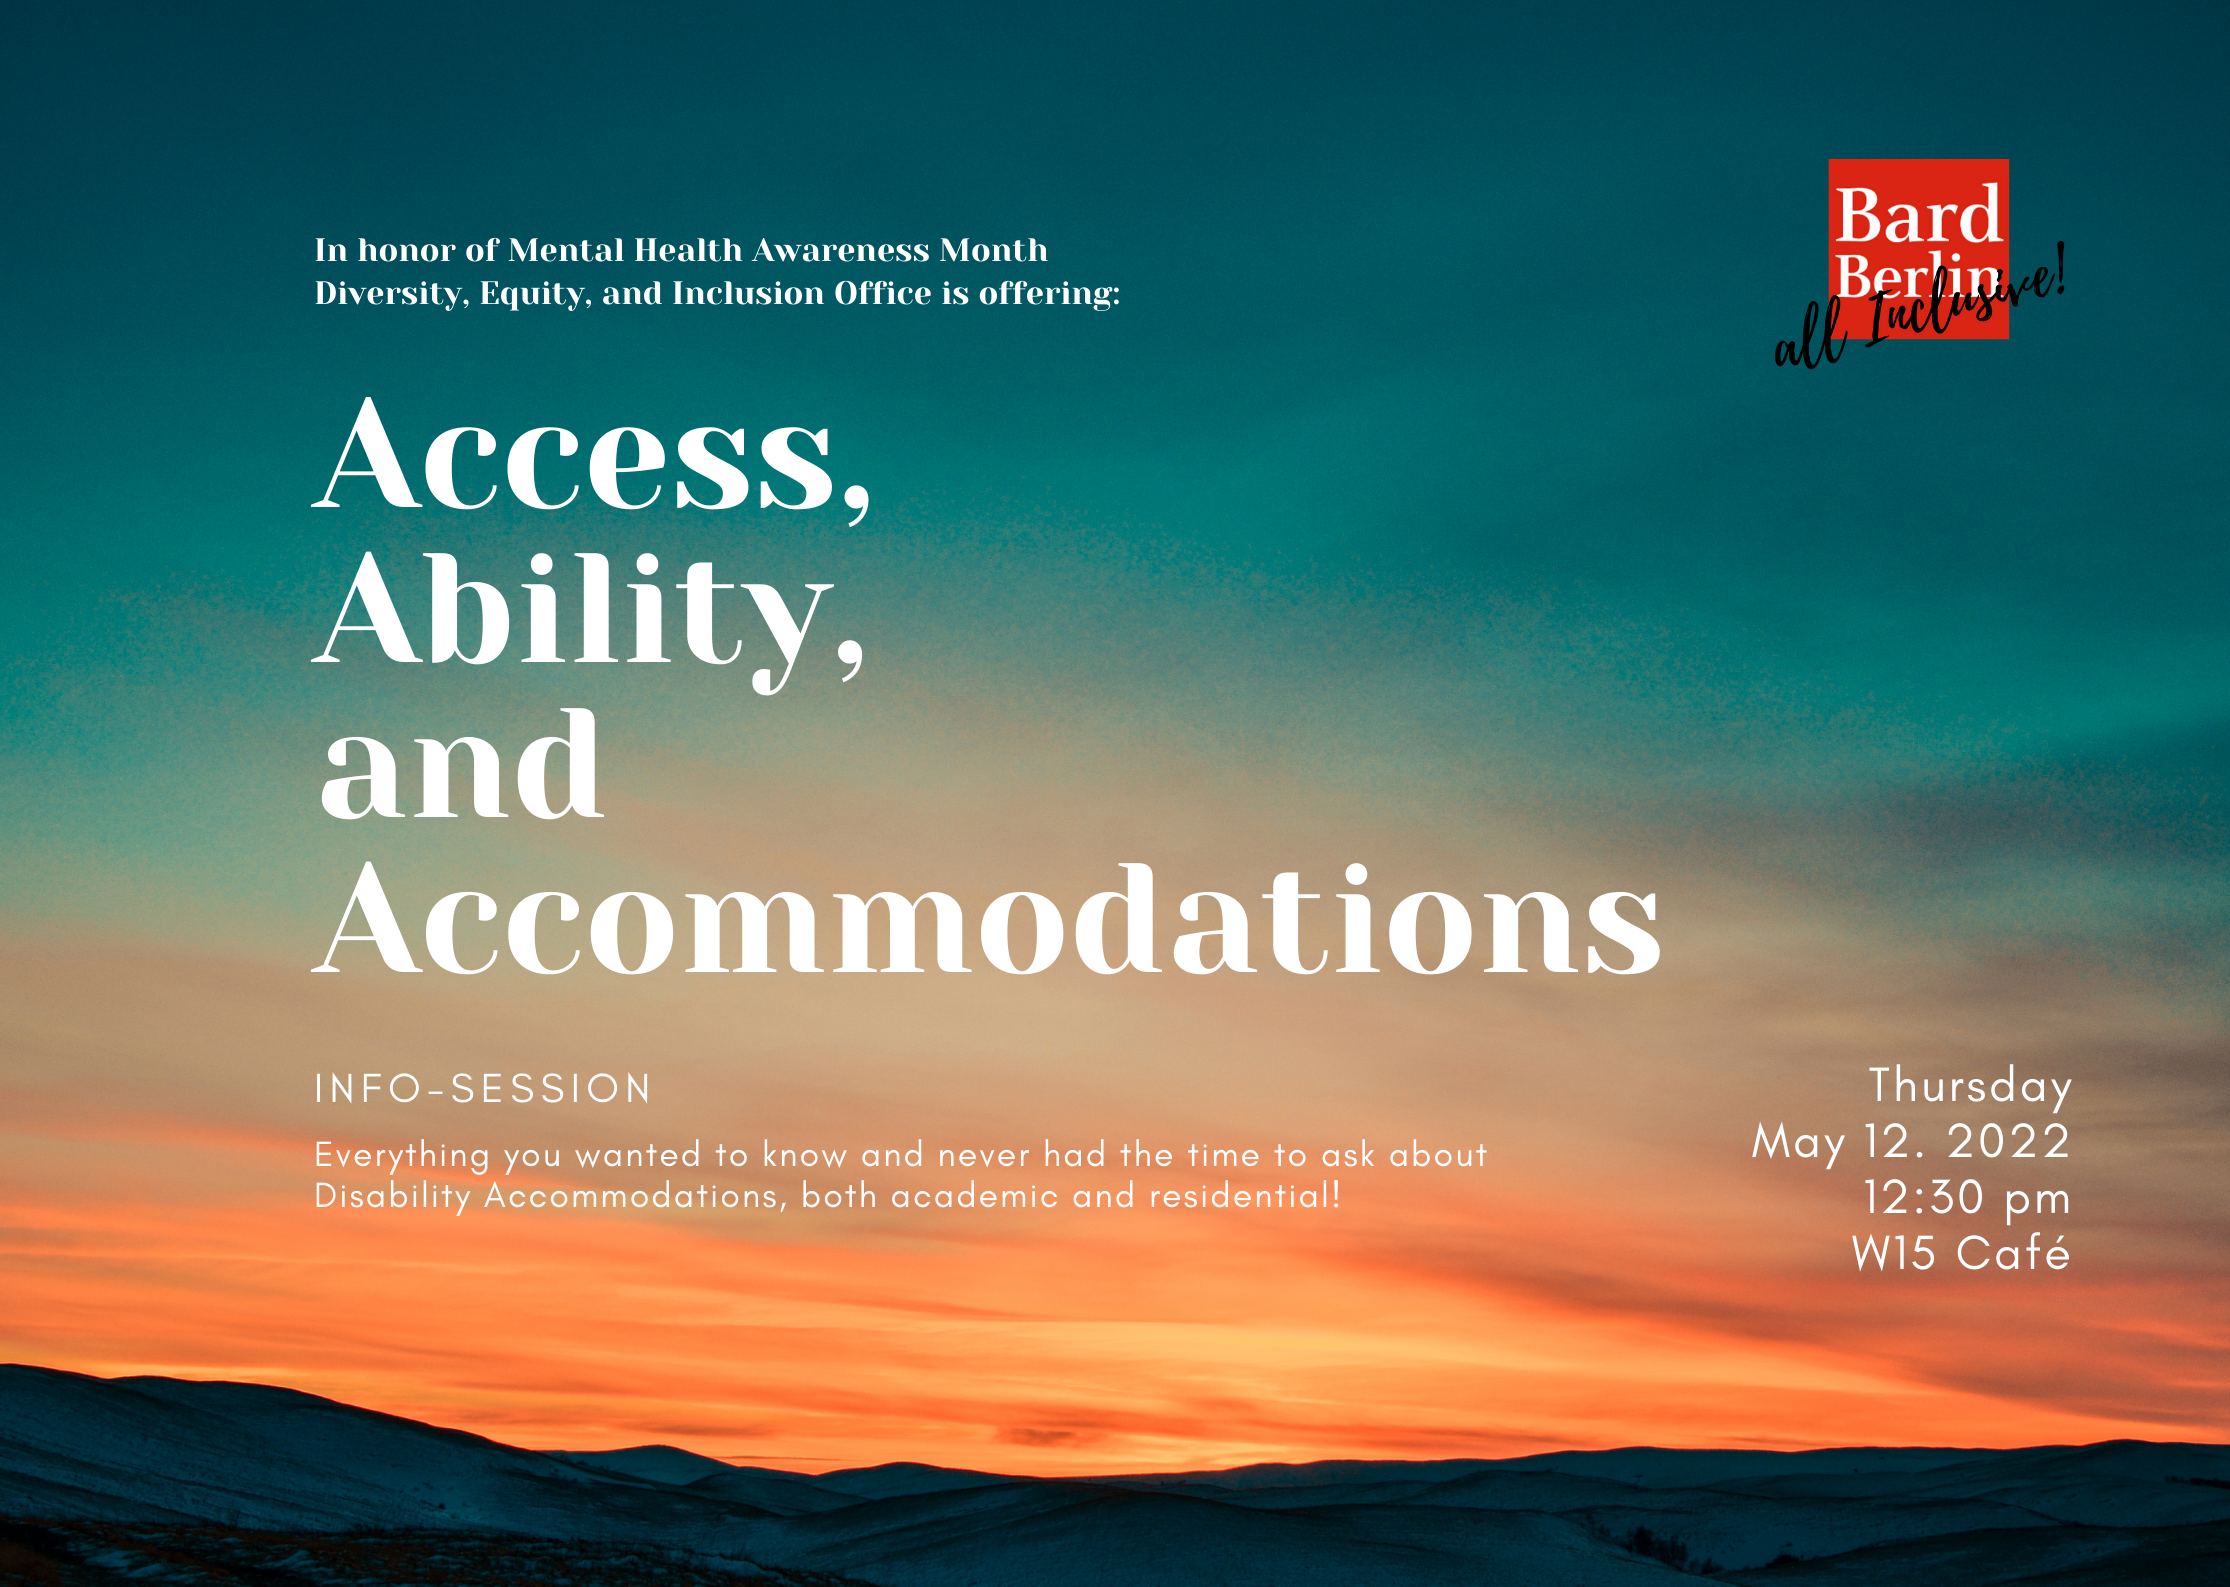 Access, Ability, and Accommodations